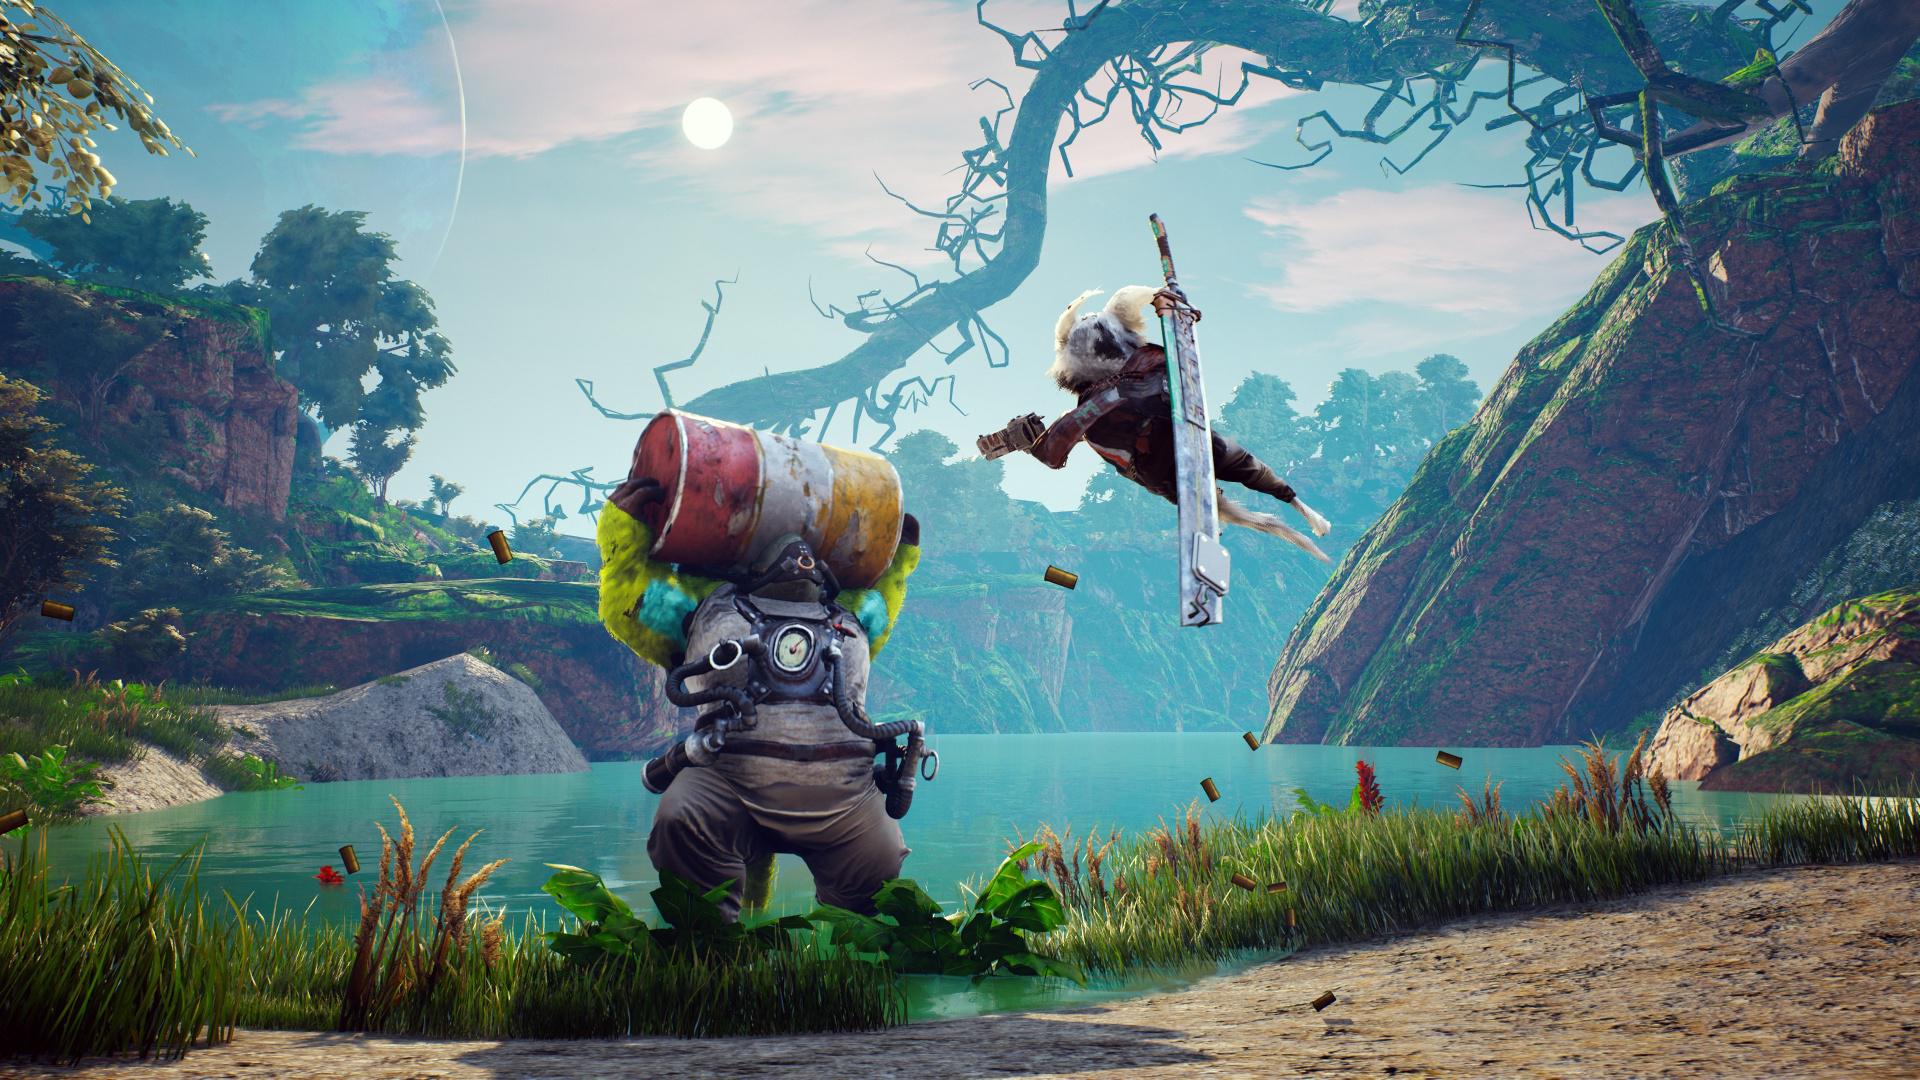 Biomutant will launch on PC, PS4, and Xbox One on May 25th | Eneba